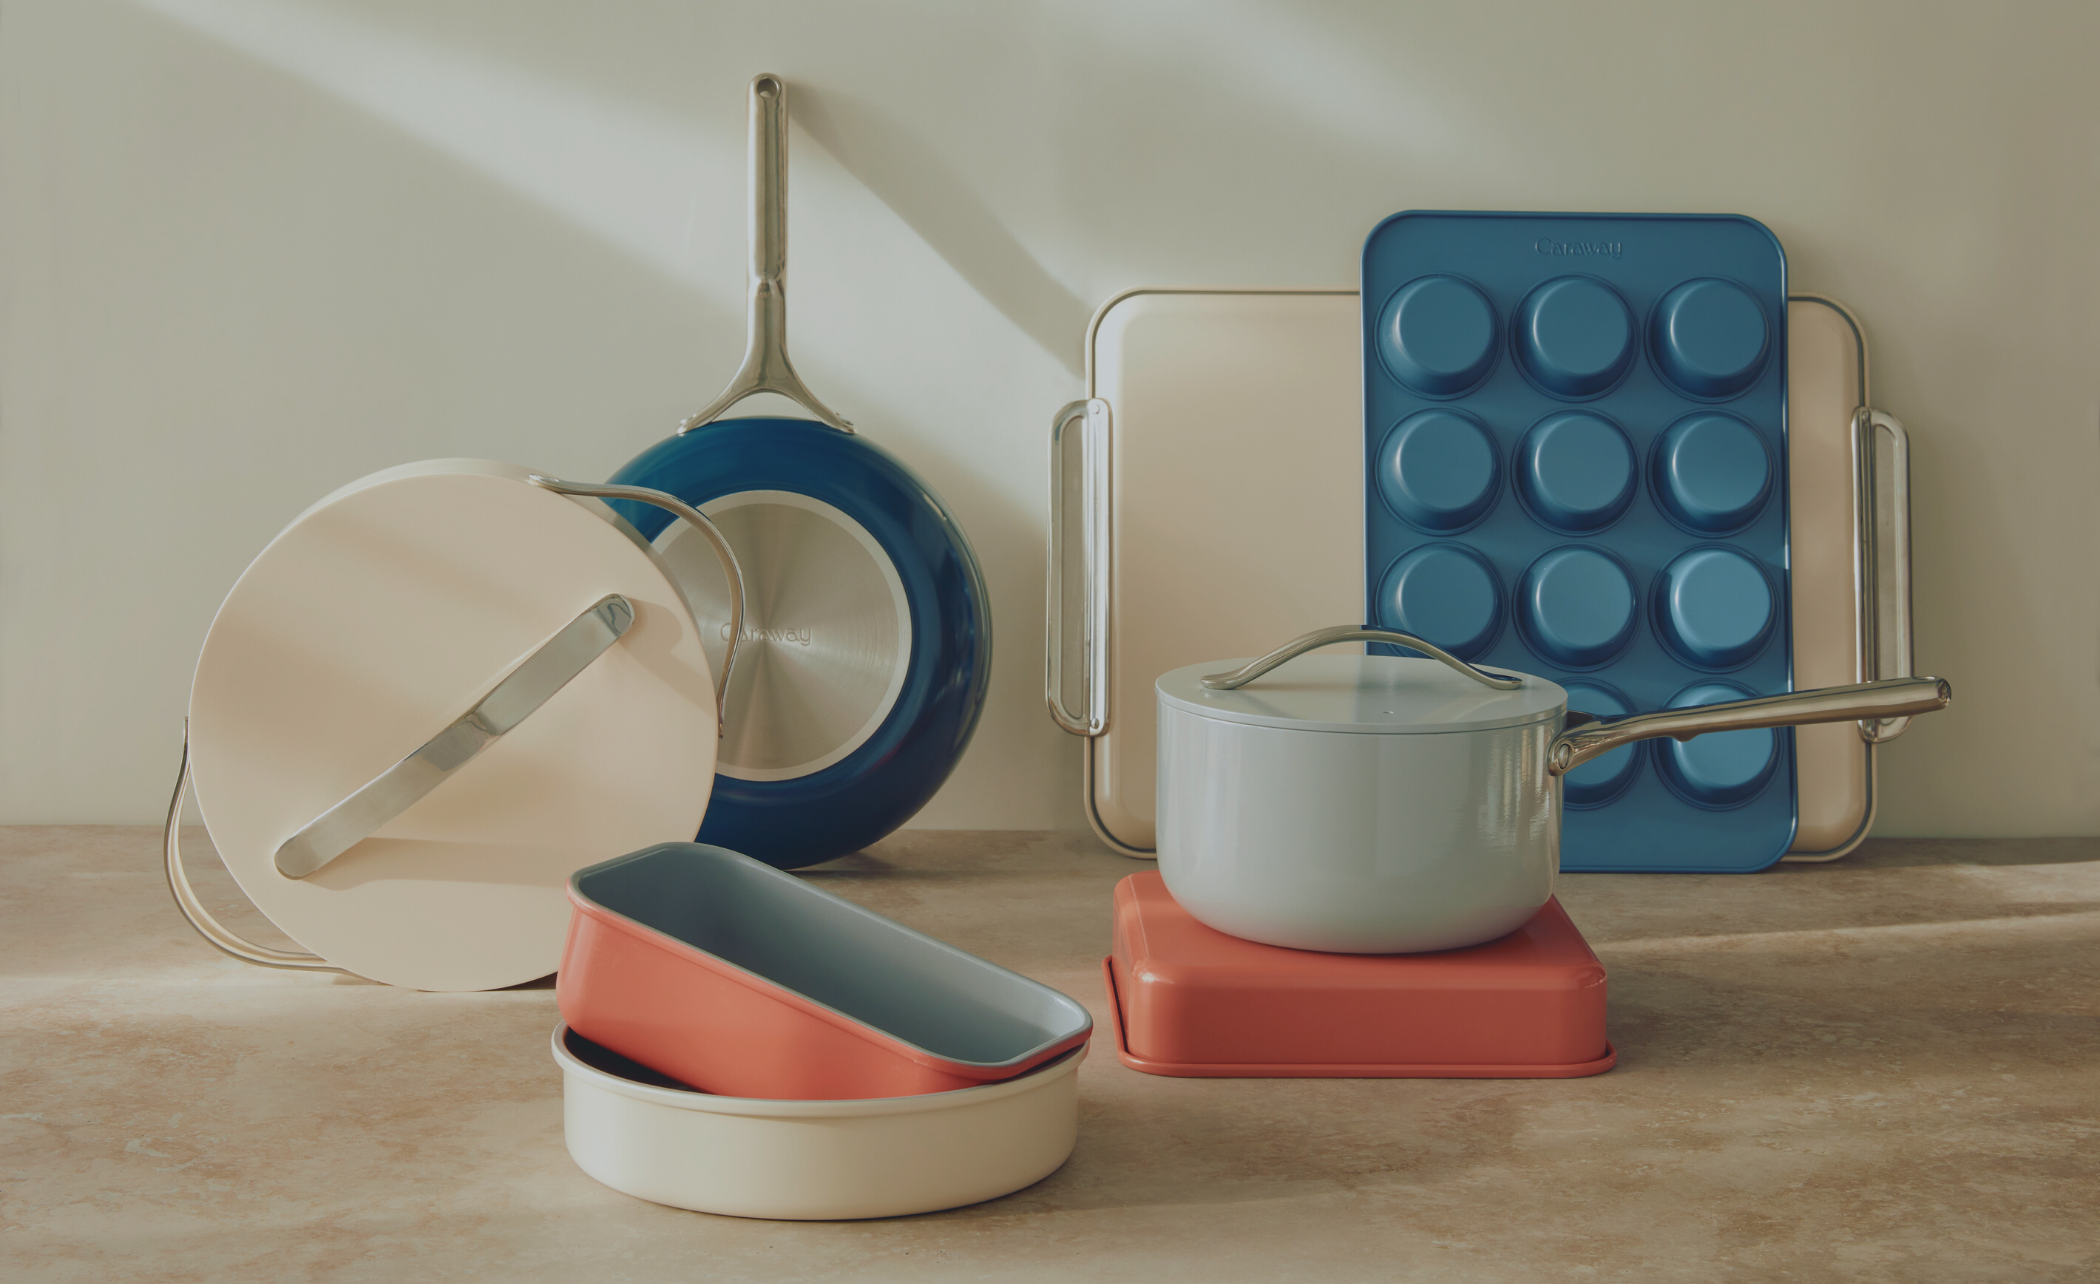 Caraway Just Launched a Stylish Non-Toxic Bakeware Collection